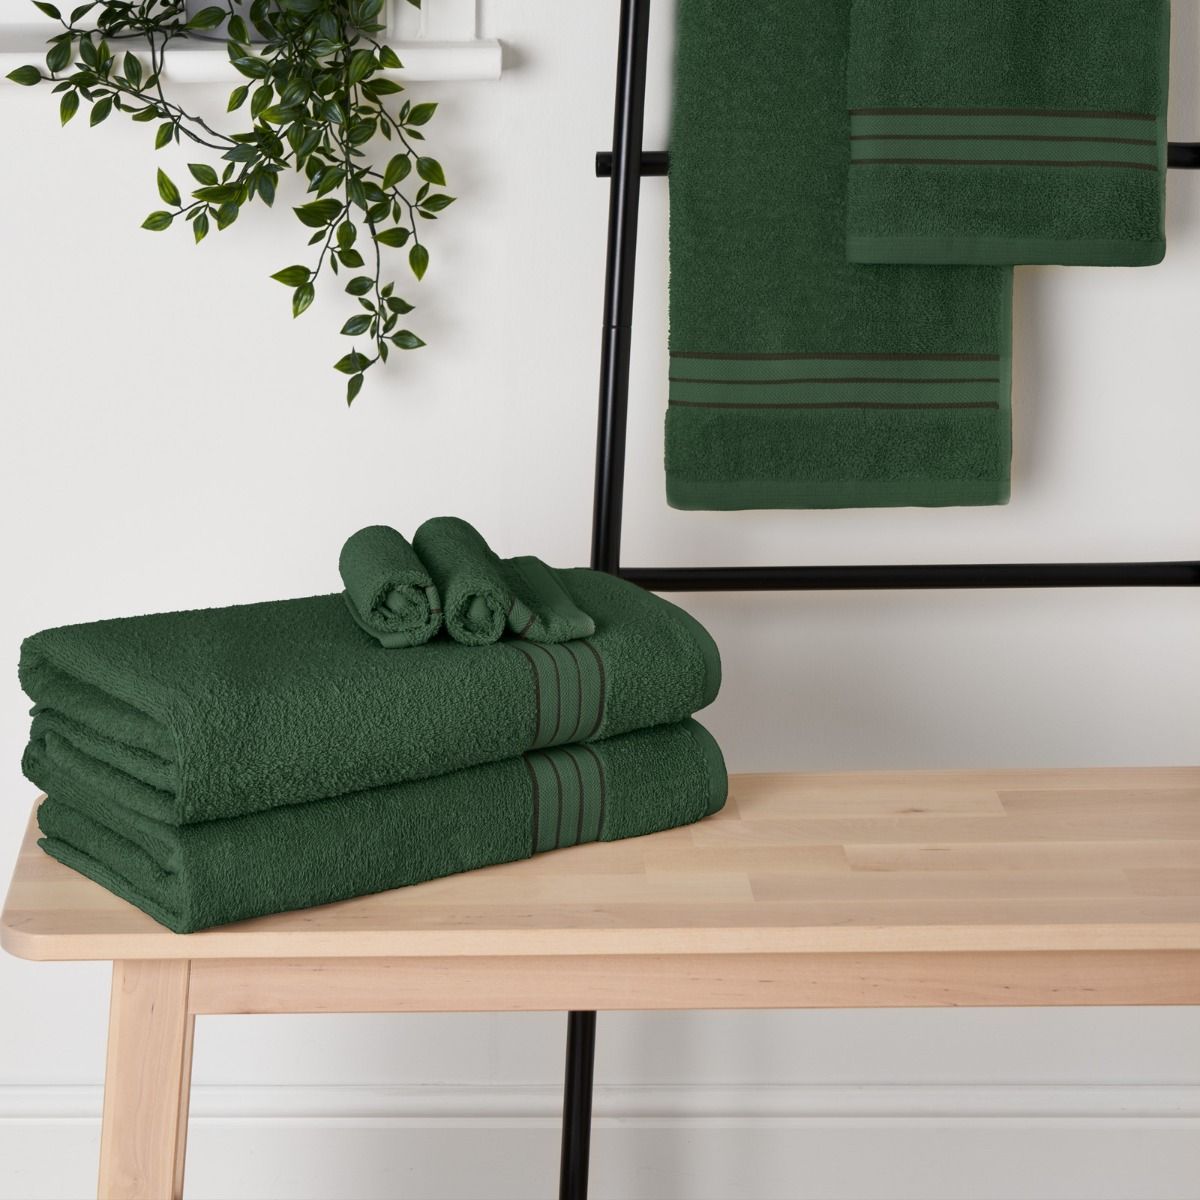 Brentfords 100% Cotton Hand Towel, Forest Green - 1PC